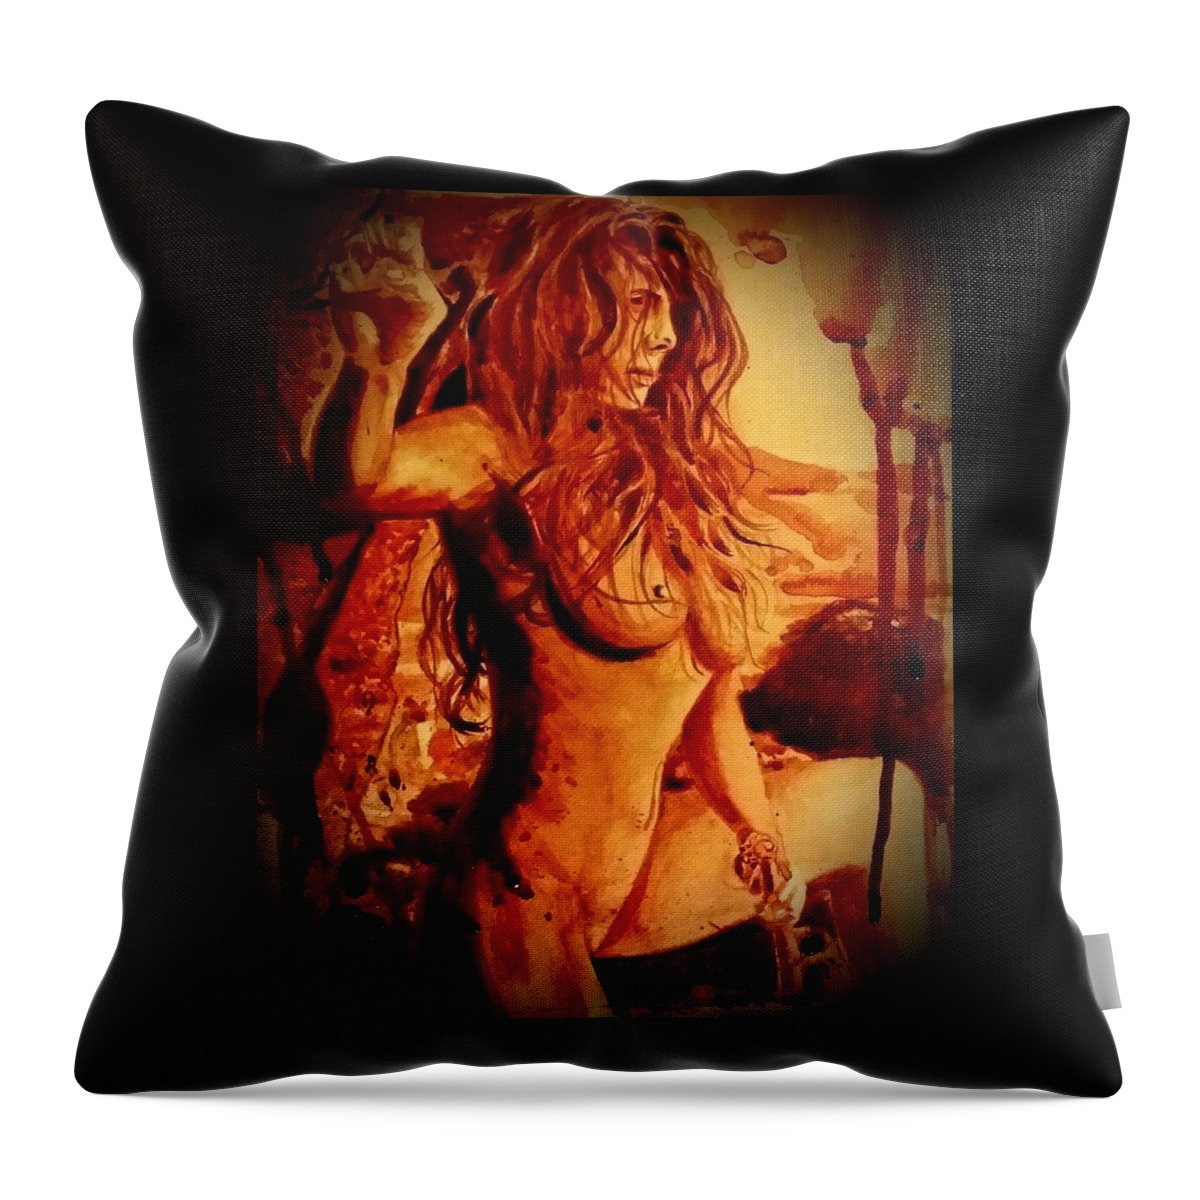 Jessica Throw Pillow featuring the painting Nude On Beach by Ryan Almighty